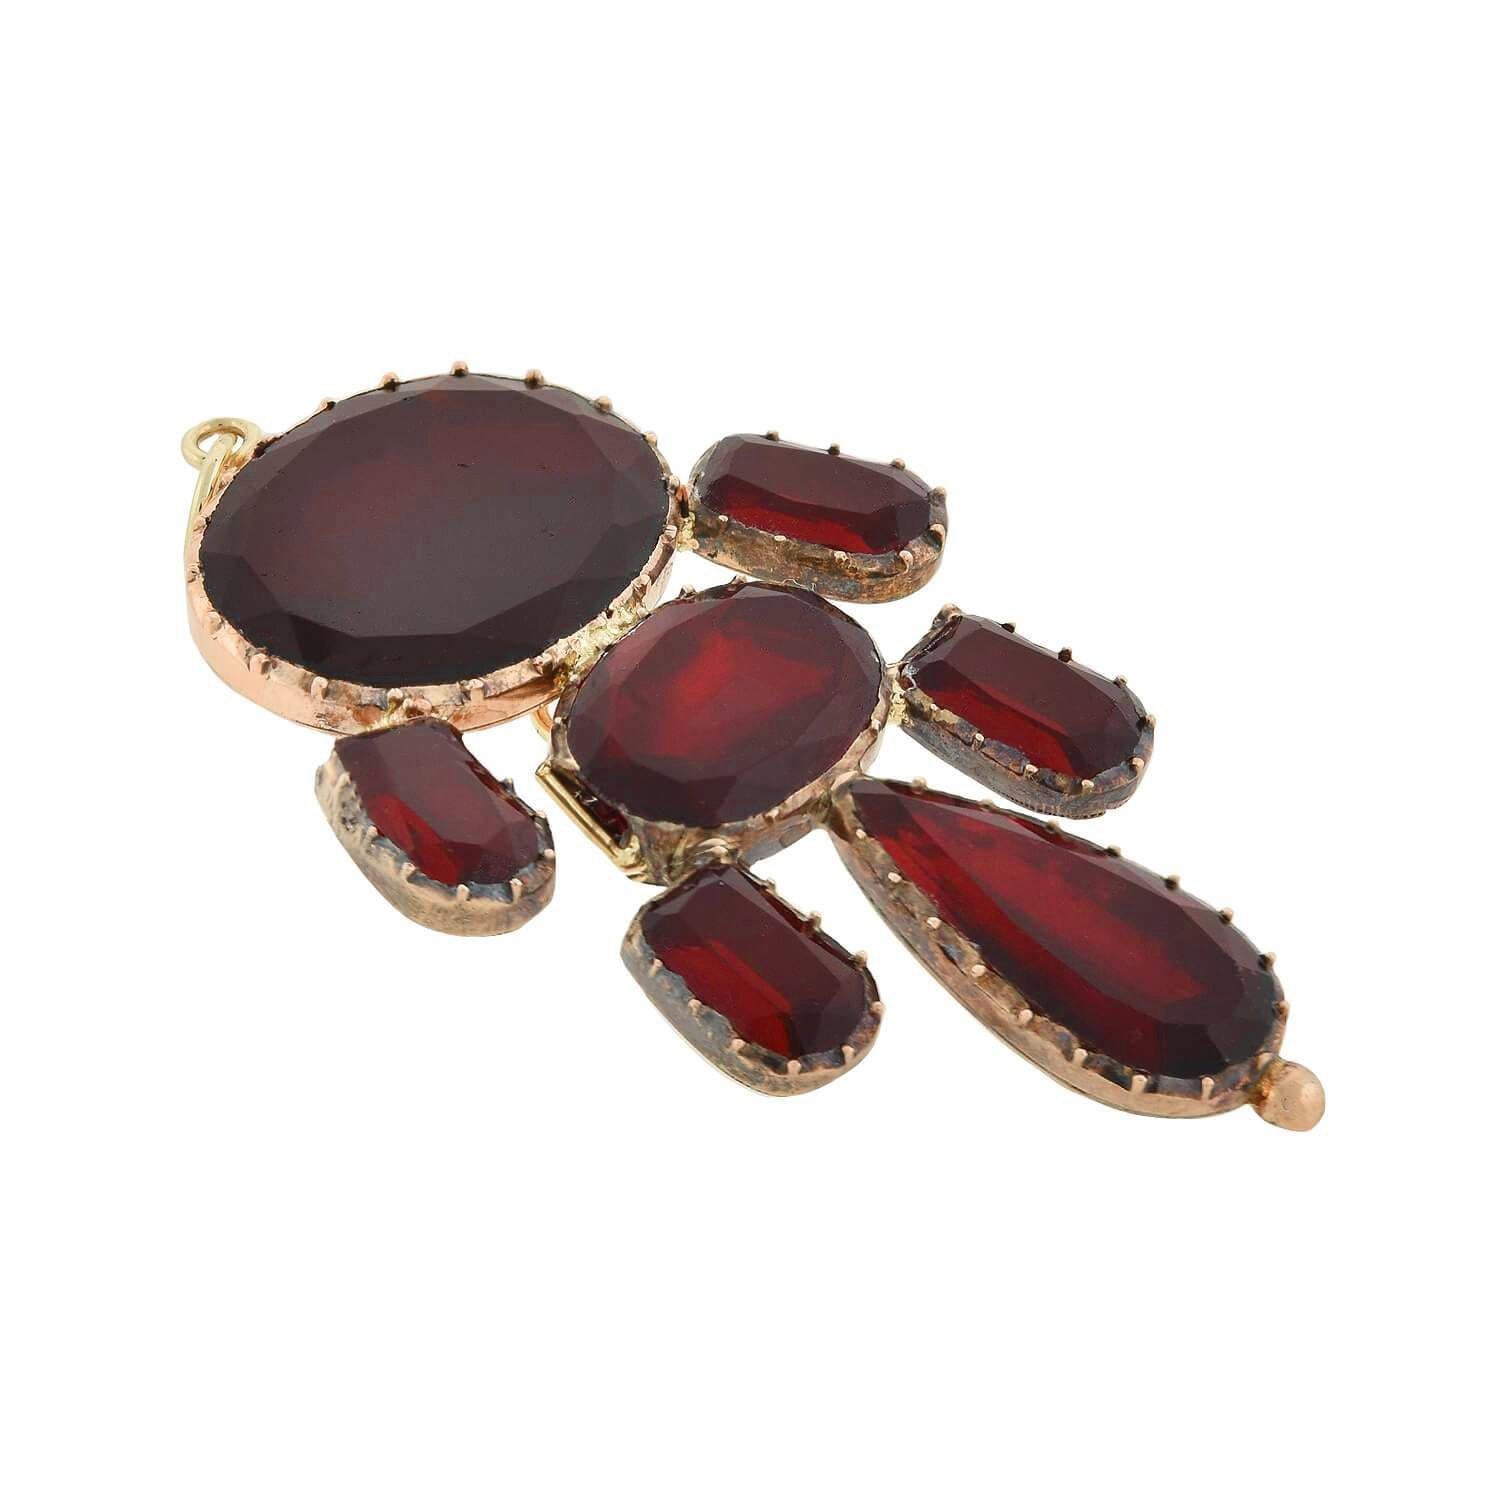 A stunning garnet pendant from the Georgian (1830s) era! Crafted in 18kt yellow gold, this beautiful piece displays seven vibrant garnets that hang from a simple gold bail in an elongated design. The garnets have a flat face with facets along the